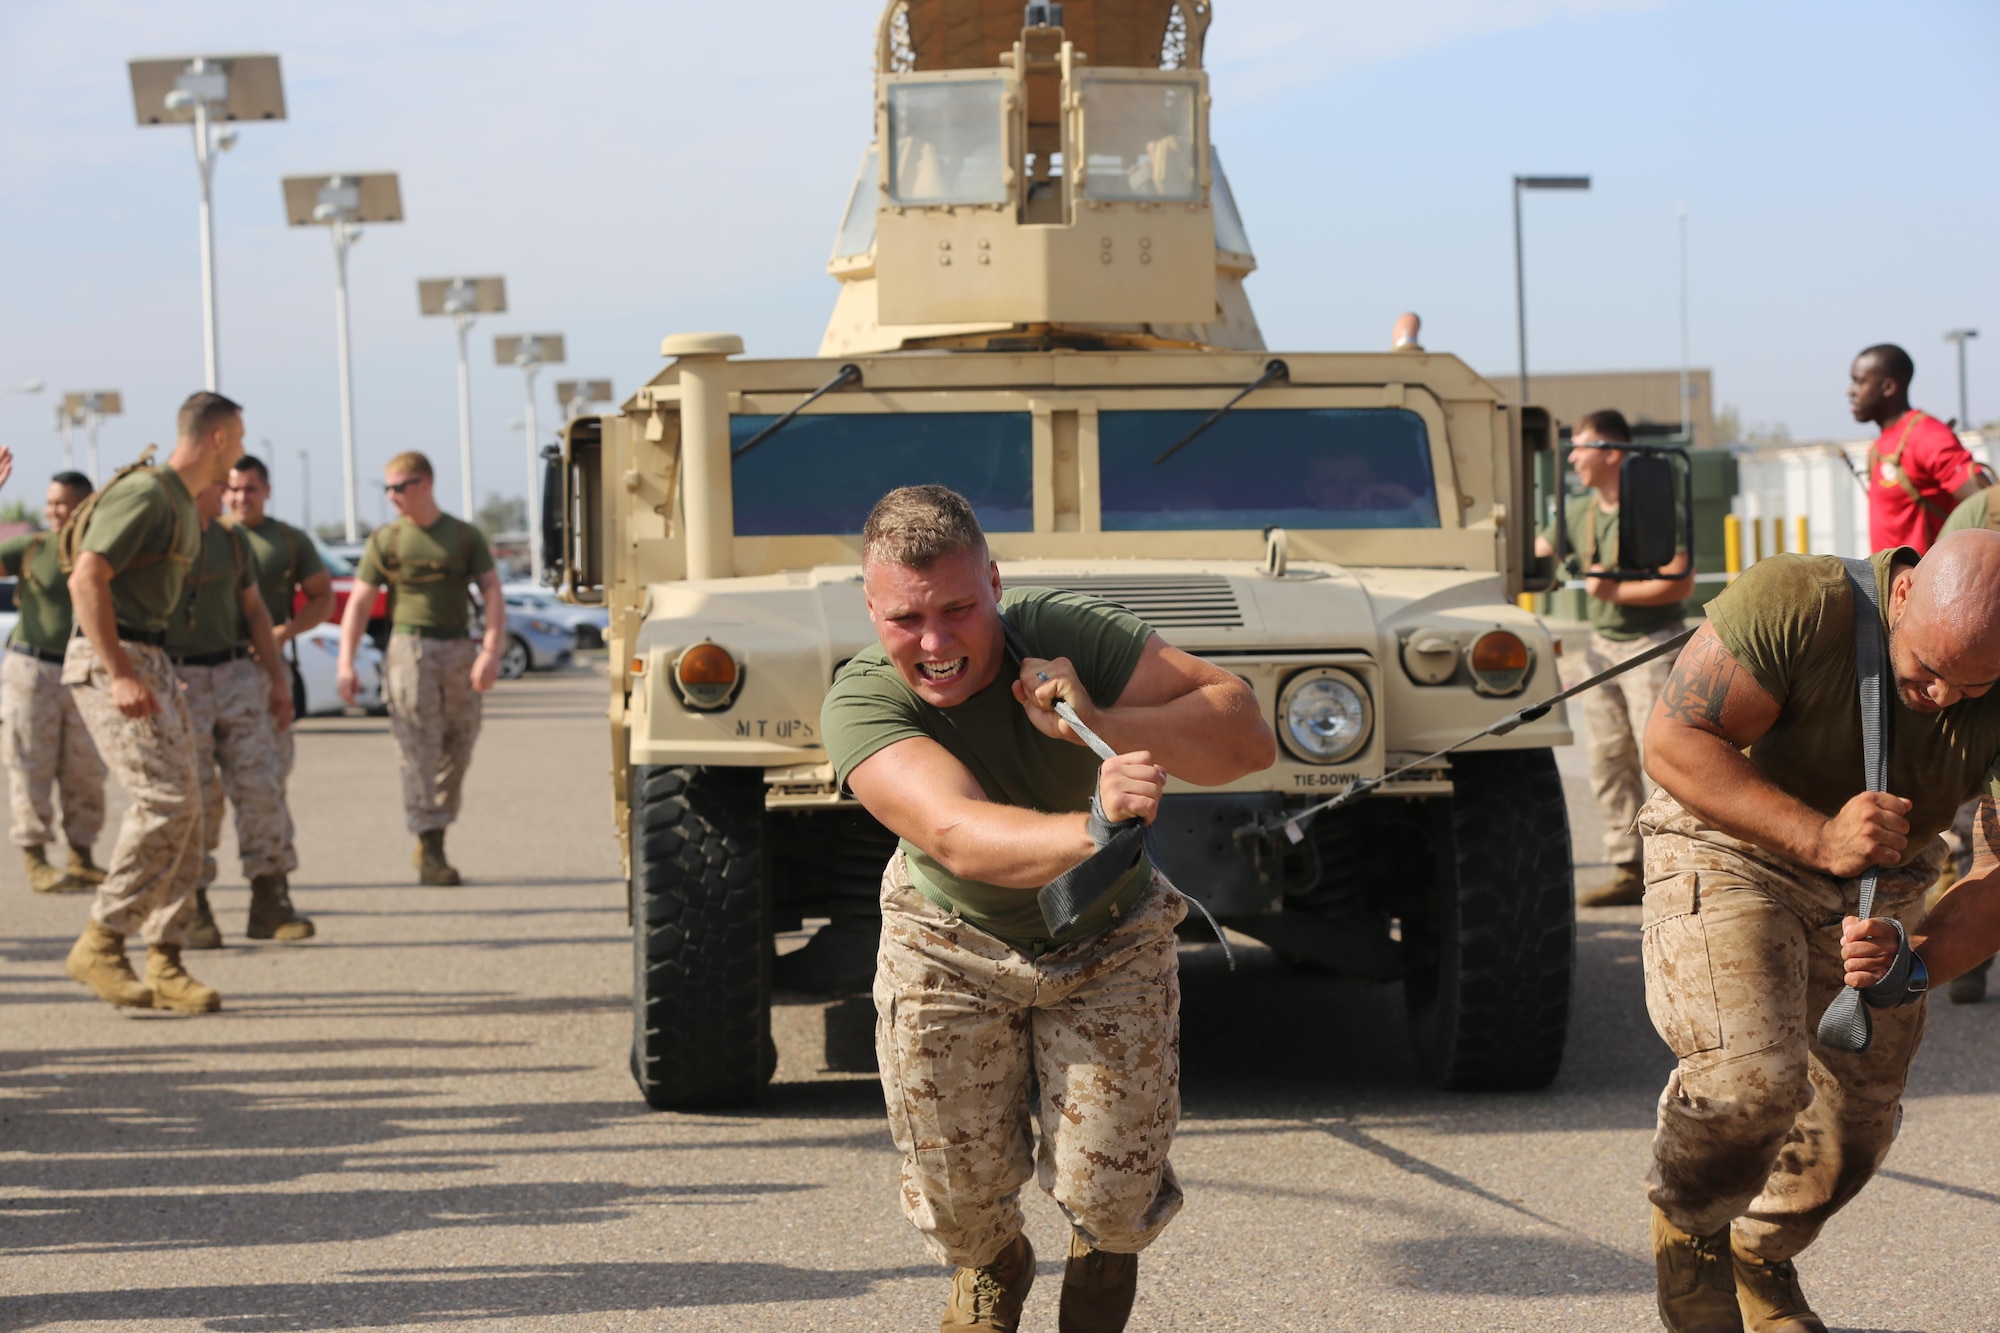 Marines with Marine Wing Support Squadron (MWSS) 373 participate in the Humvee-pull event during the MWSS-373 Field Meet aboard Marine Corps Air Station Miramar, California, June 26. The field meet commemorates the birthday of the unit. 